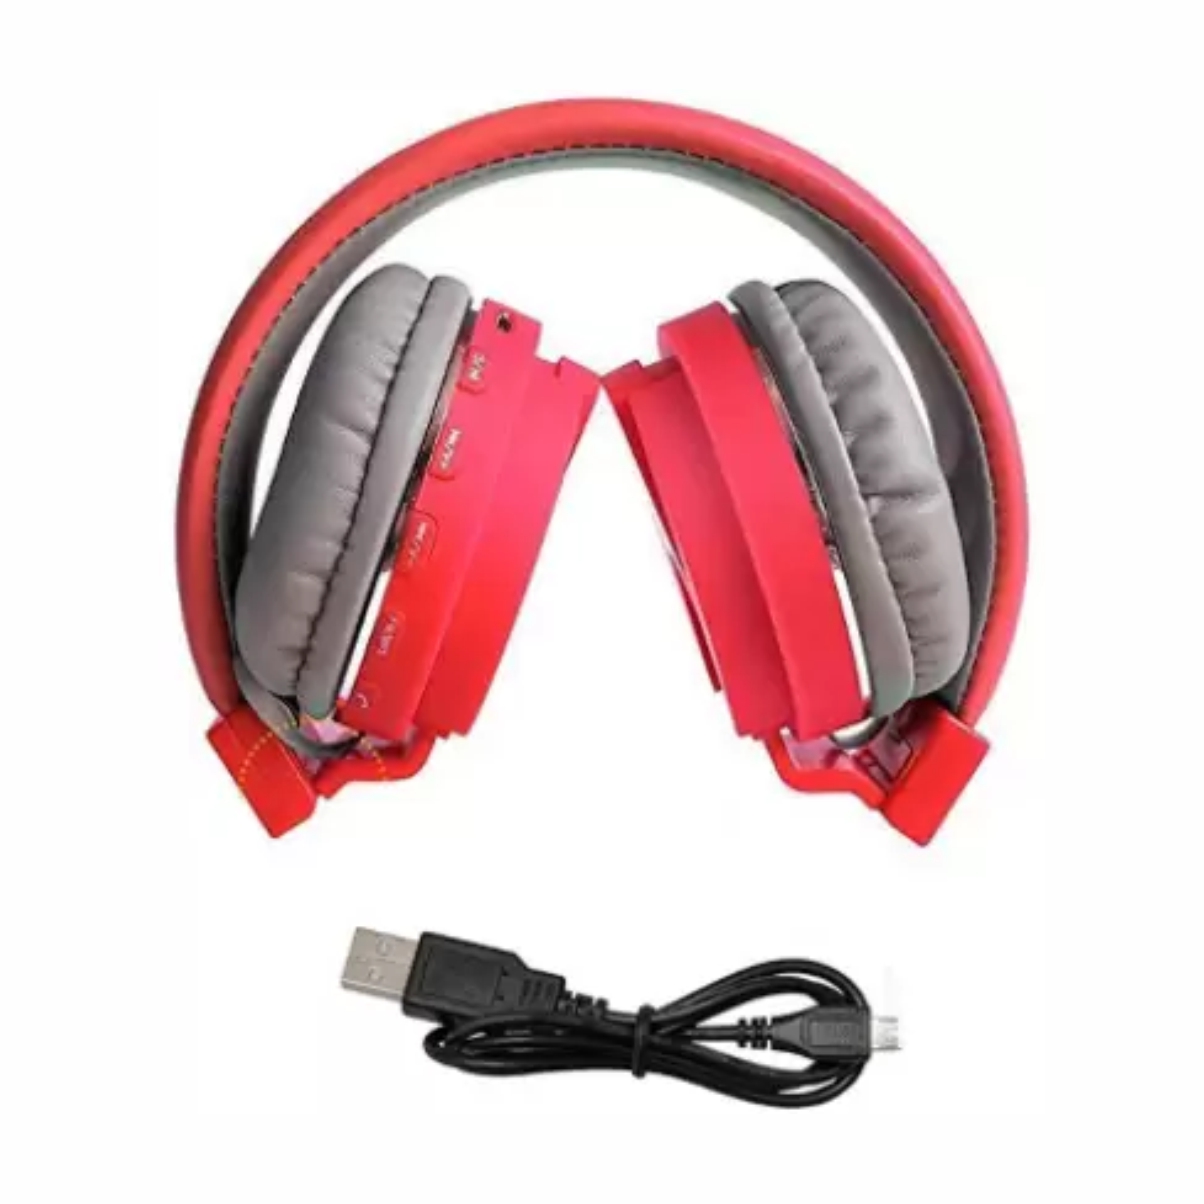 SH12 WIRELESS BLUETOOTH SPORTS HEADPHONE WITH MIC,STEREO,SD CARD SUPPORT Bluetooth Headset  (Multicolor, True Wireless)